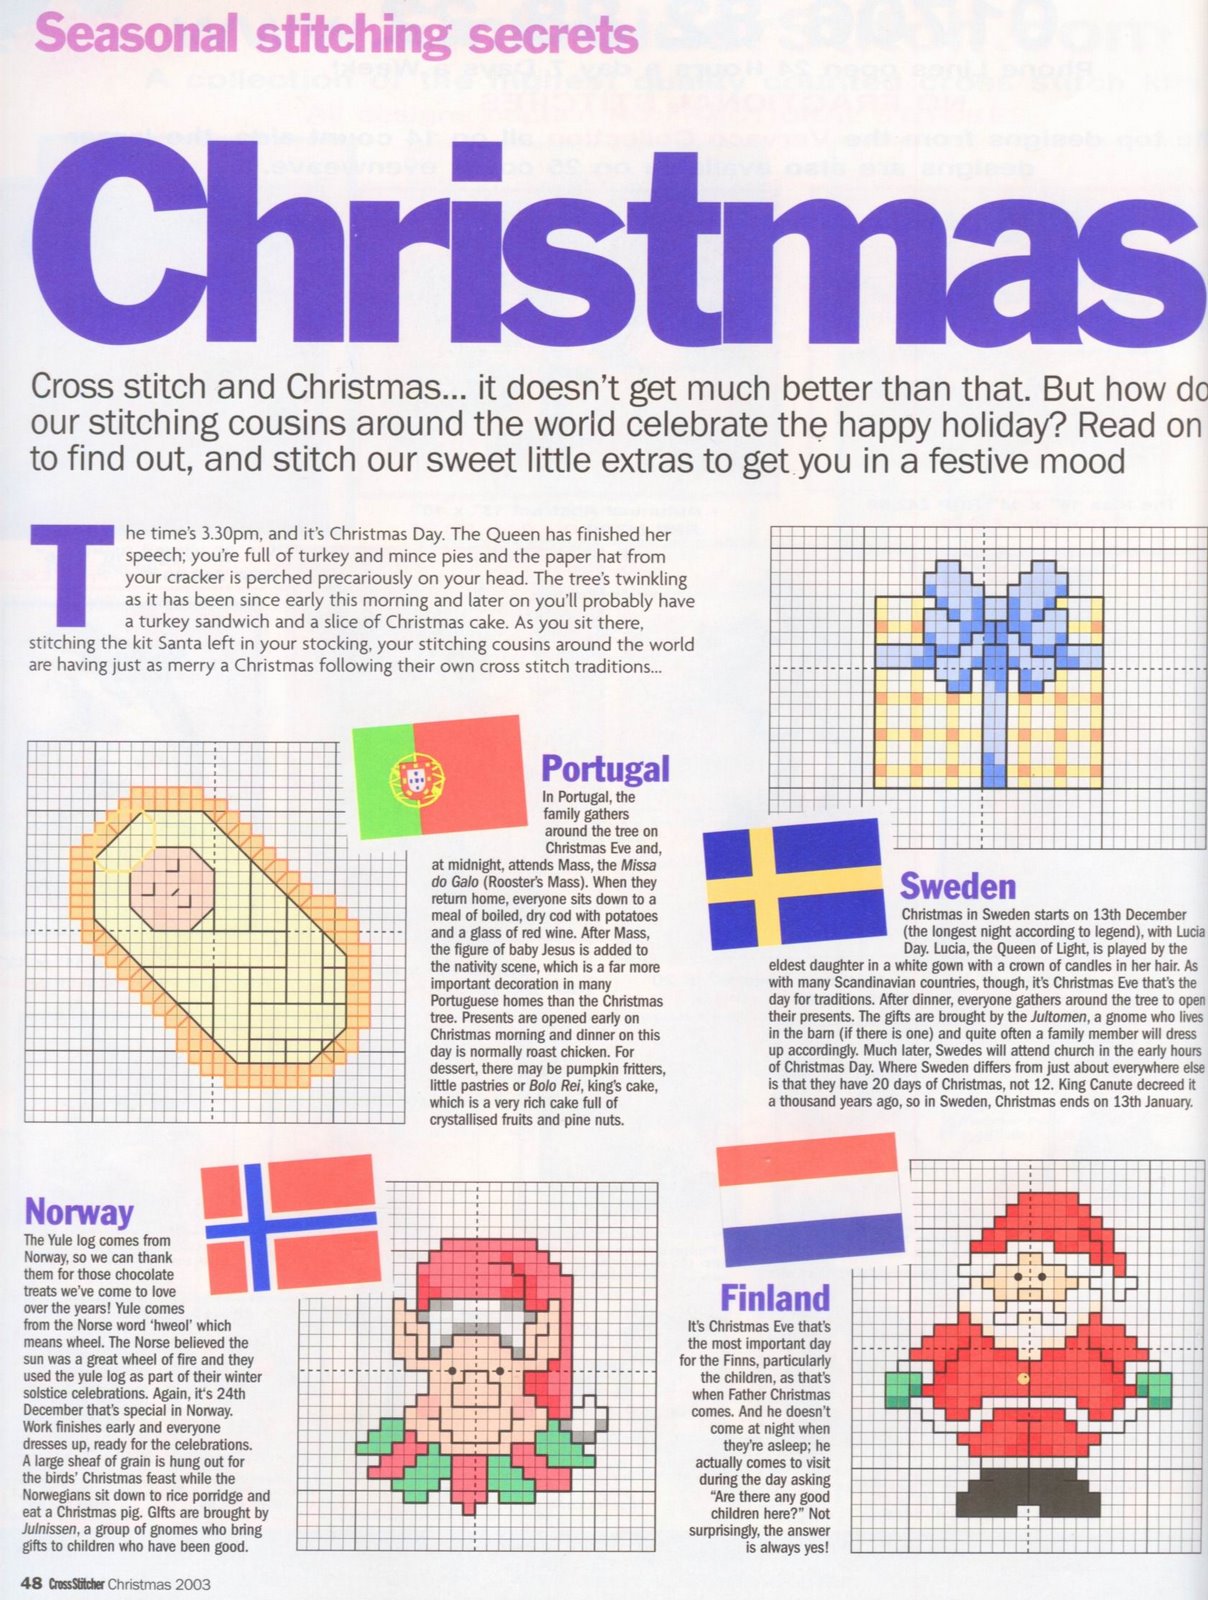 Small and simple Christmas cross stitch patterns (1)